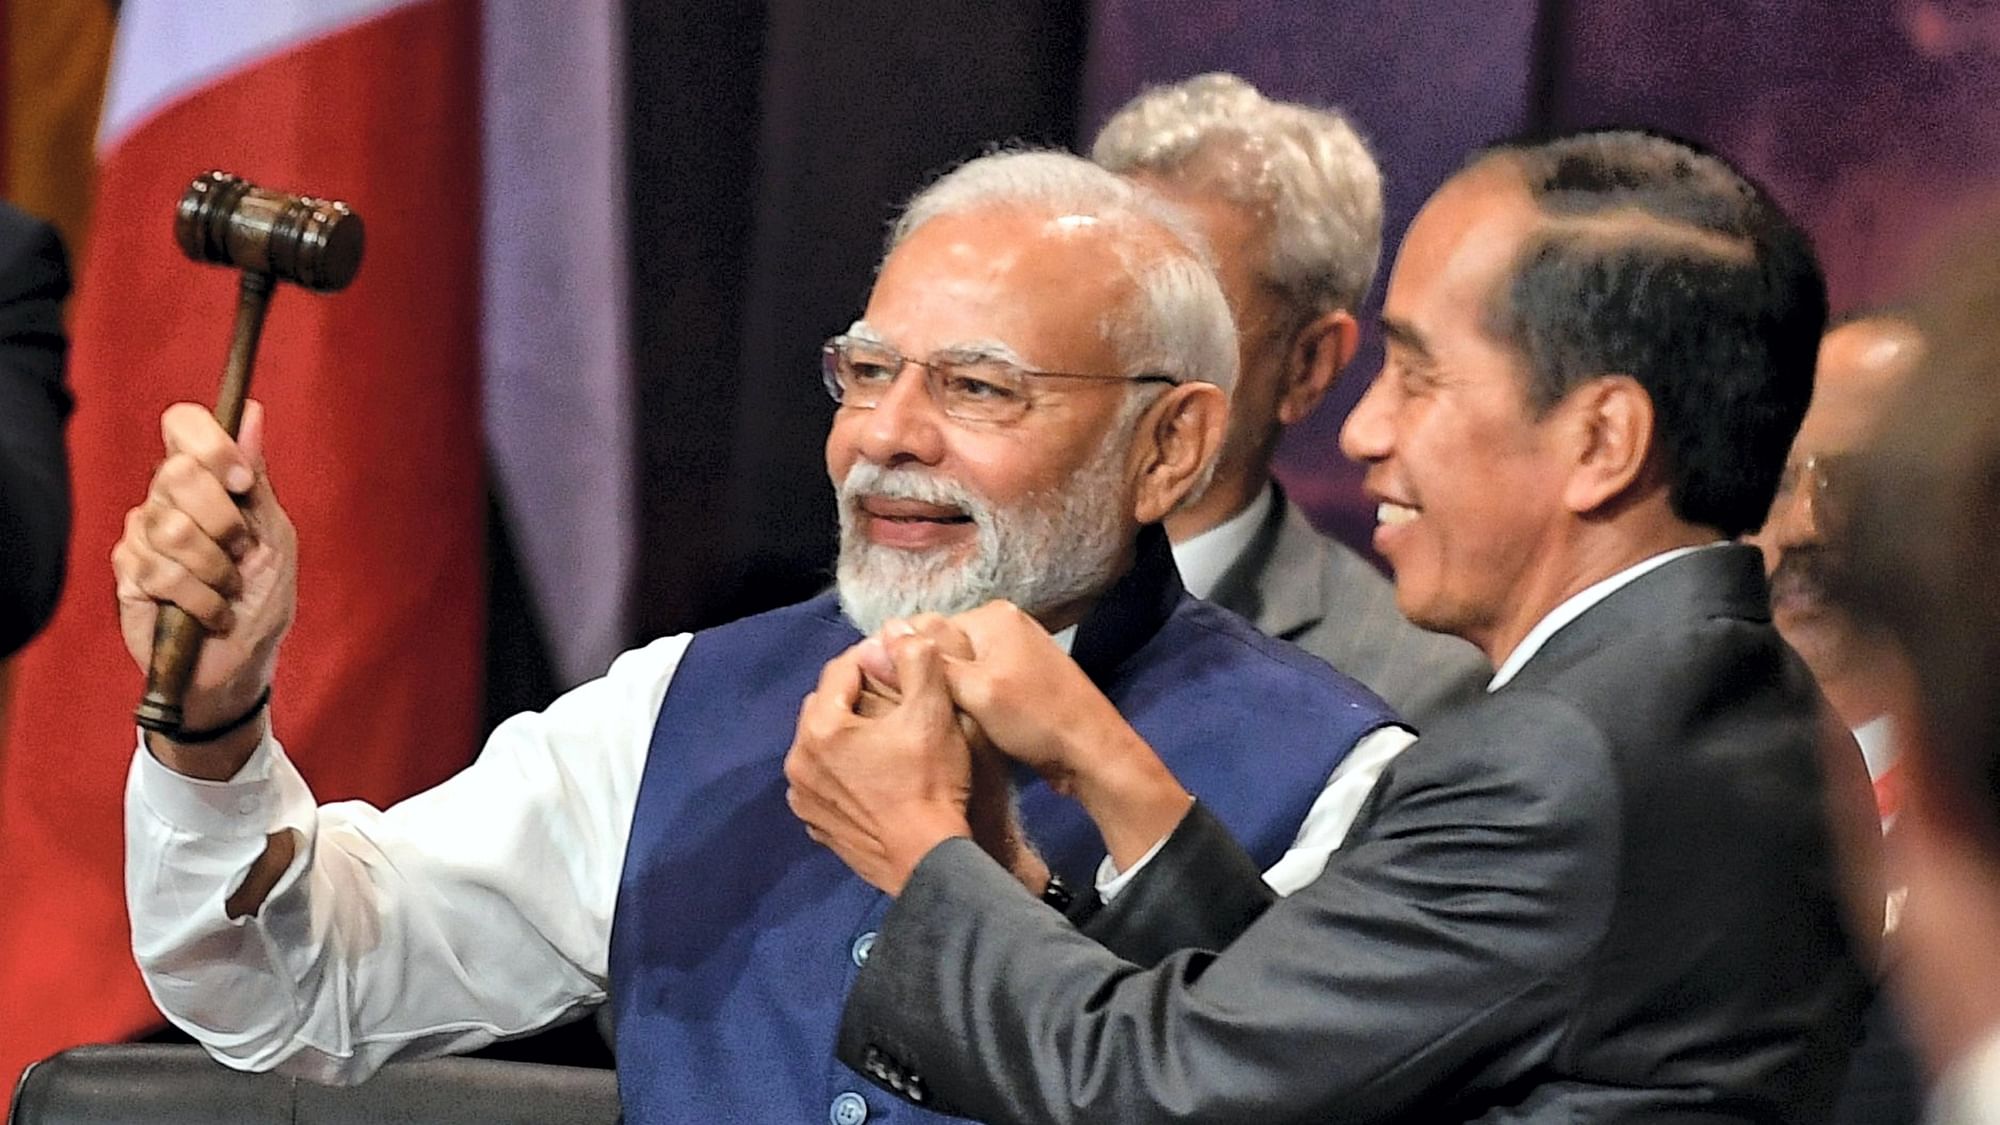 <div class="paragraphs"><p>Prime Minister Narendra Modi, left, and Indonesia's President Joko Widodo take part in the handover ceremony at the G20 Leaders' Summit, in Nusa Dua, Bali, Indonesia, Wednesday, 16 November 2022.</p></div>